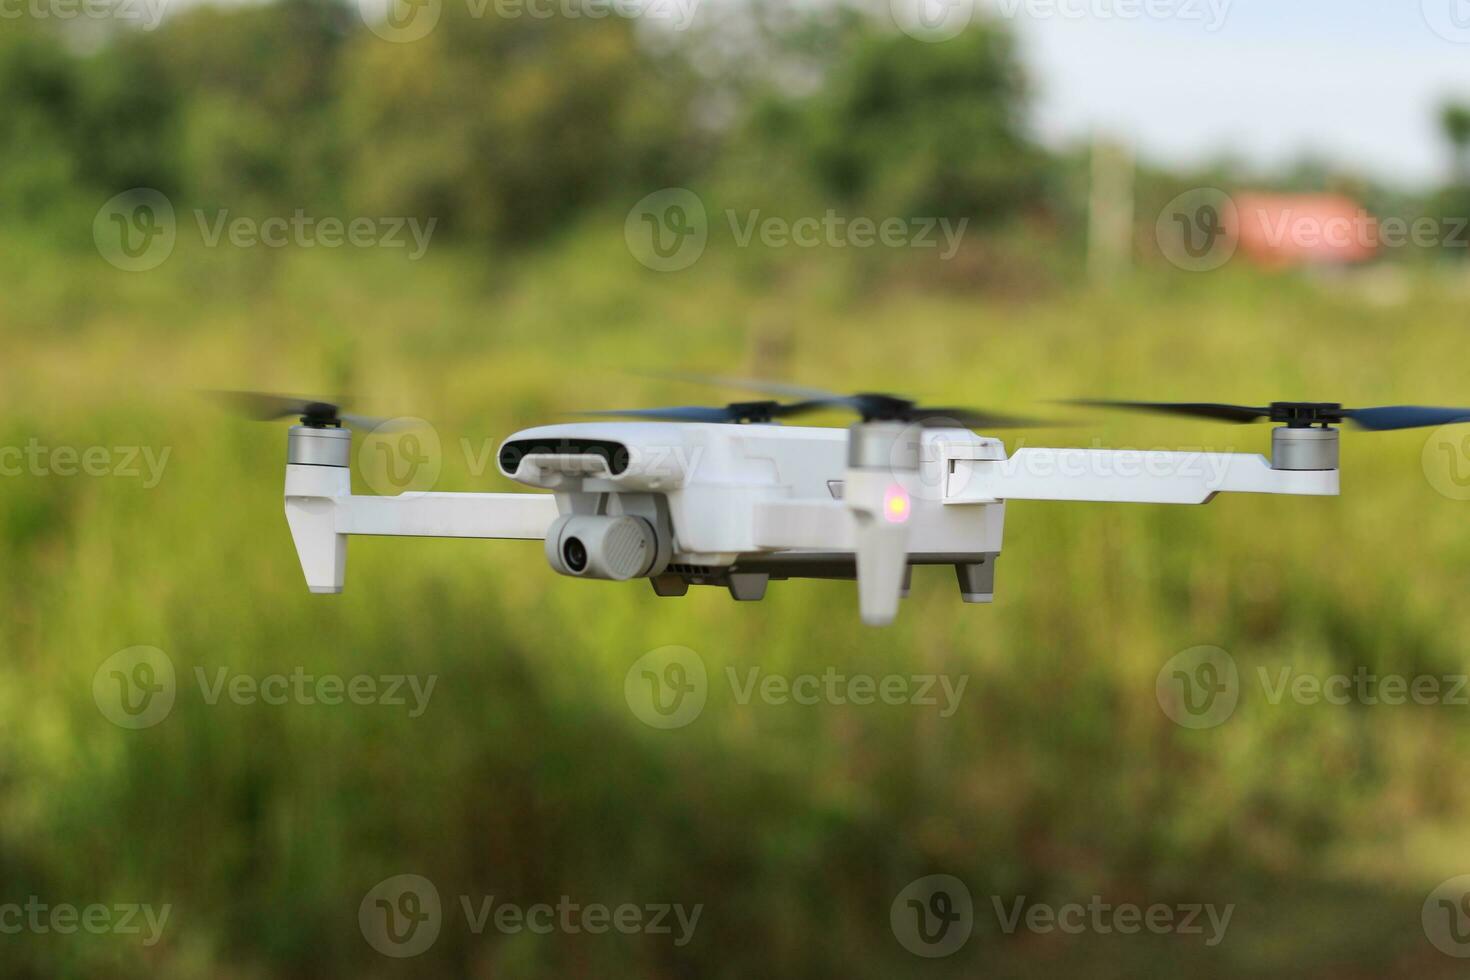 a photo of a drone flying with a blurry propeller against a green open space background. technology photo concept.